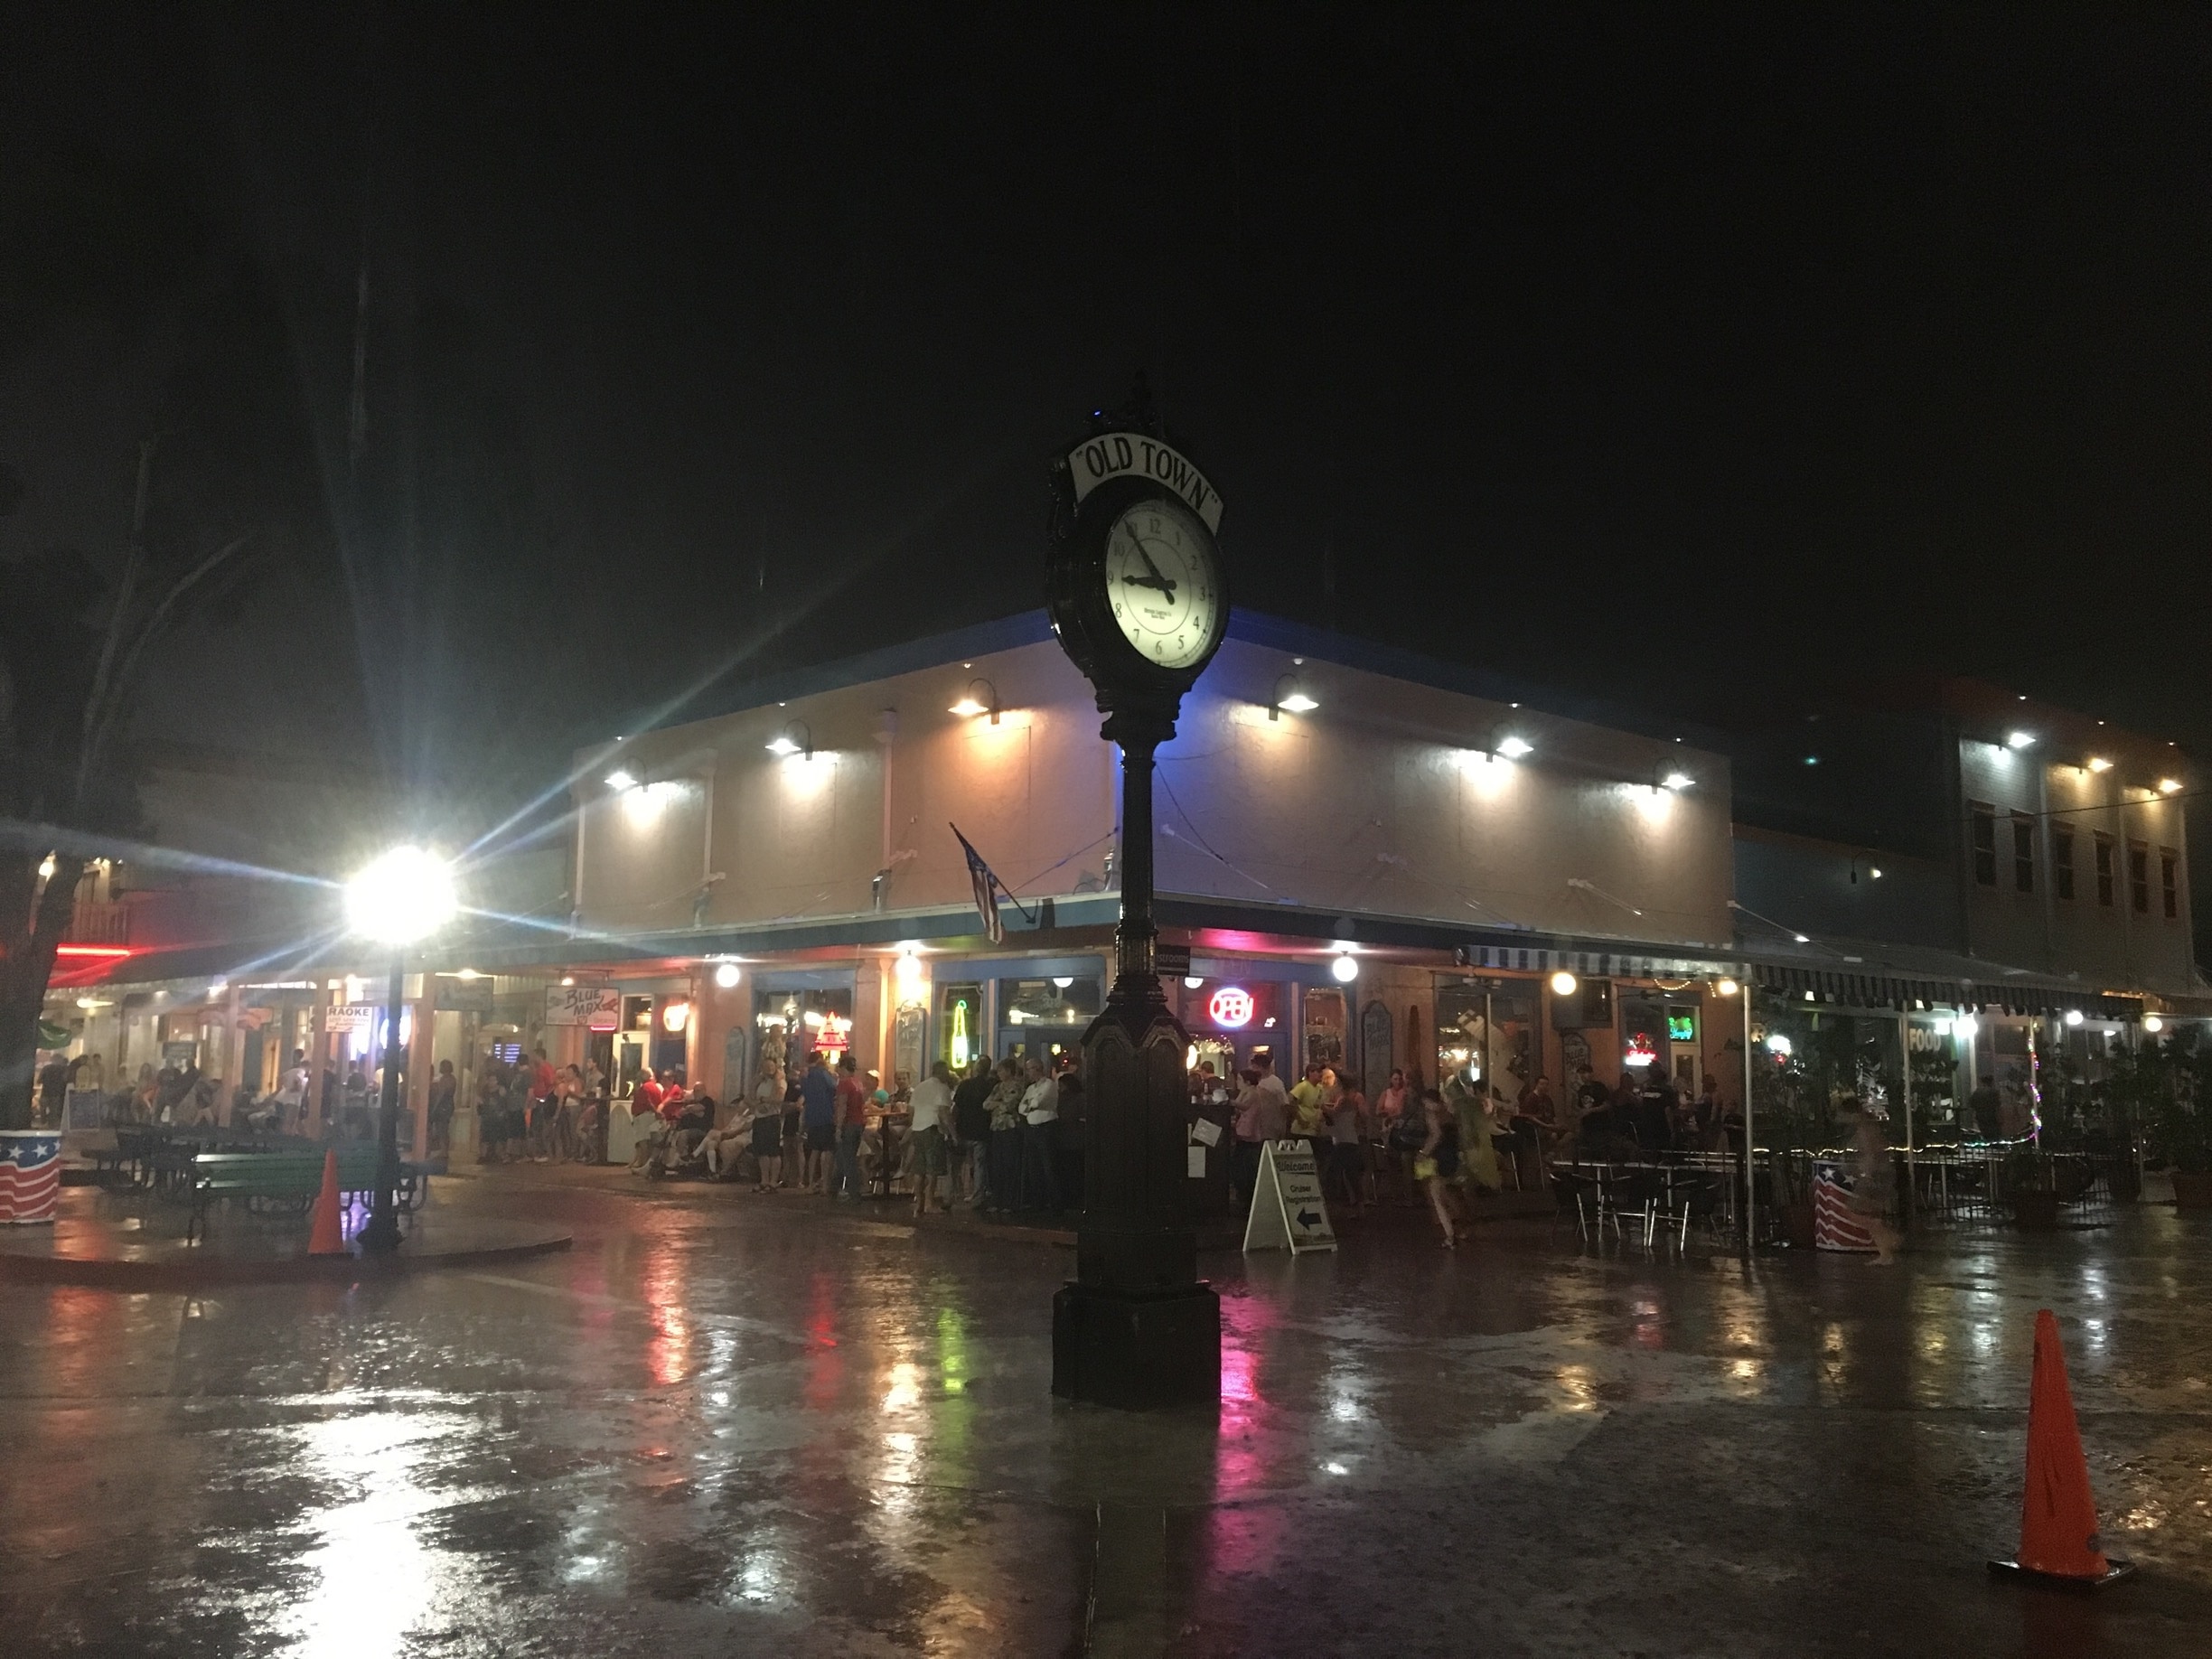 caught in a torrential downpour while exploring Old Town but did get to see lots of the awesome classic cars that come out for the weekly Friday night car show - a busy tourist spot but a nice change from the neighboring Disney/Sea World/Universal parks